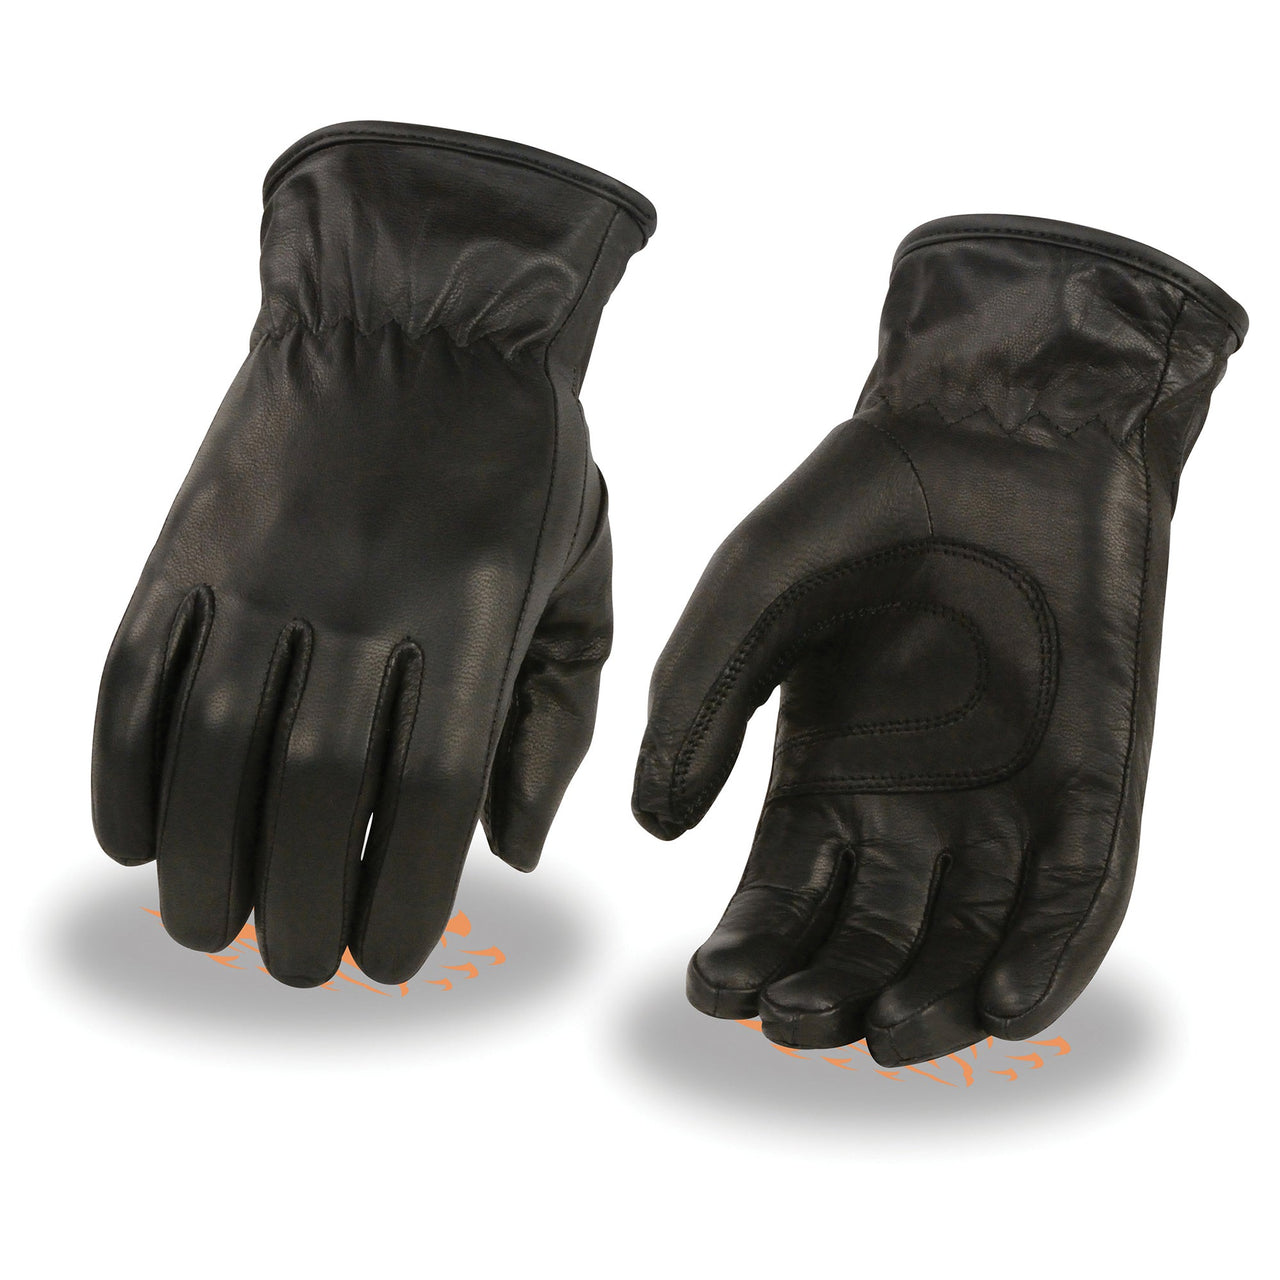 Ladies Thermal Lined Leather Gloves w/ Cinch Wrist - HighwayLeather